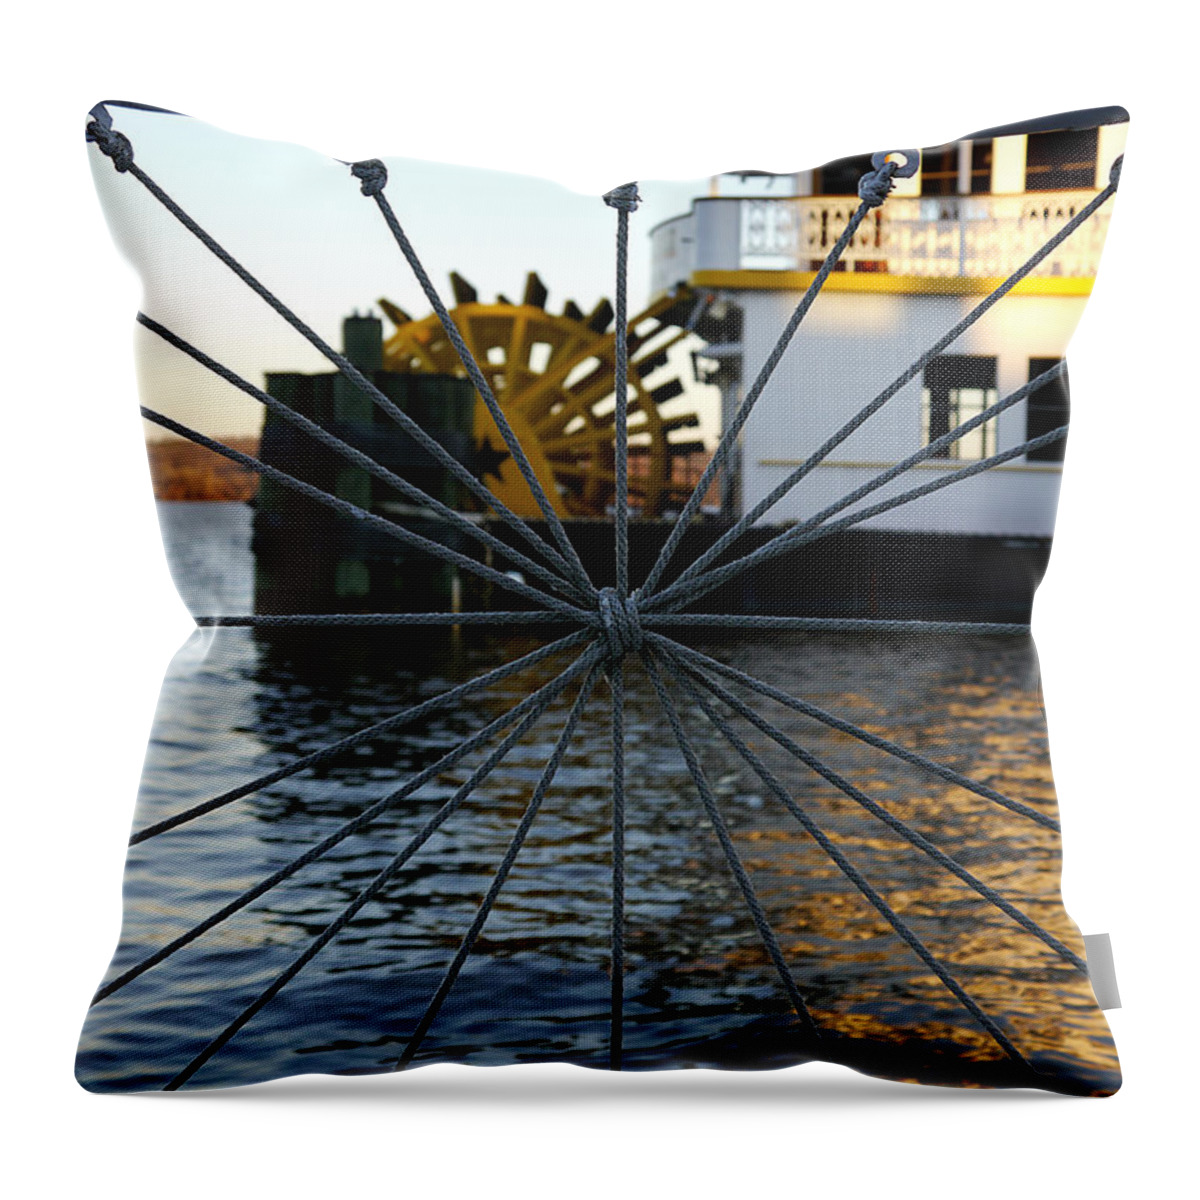 Richard Reeve Throw Pillow featuring the photograph Steamboat - Cherry Blossom 3 by Richard Reeve